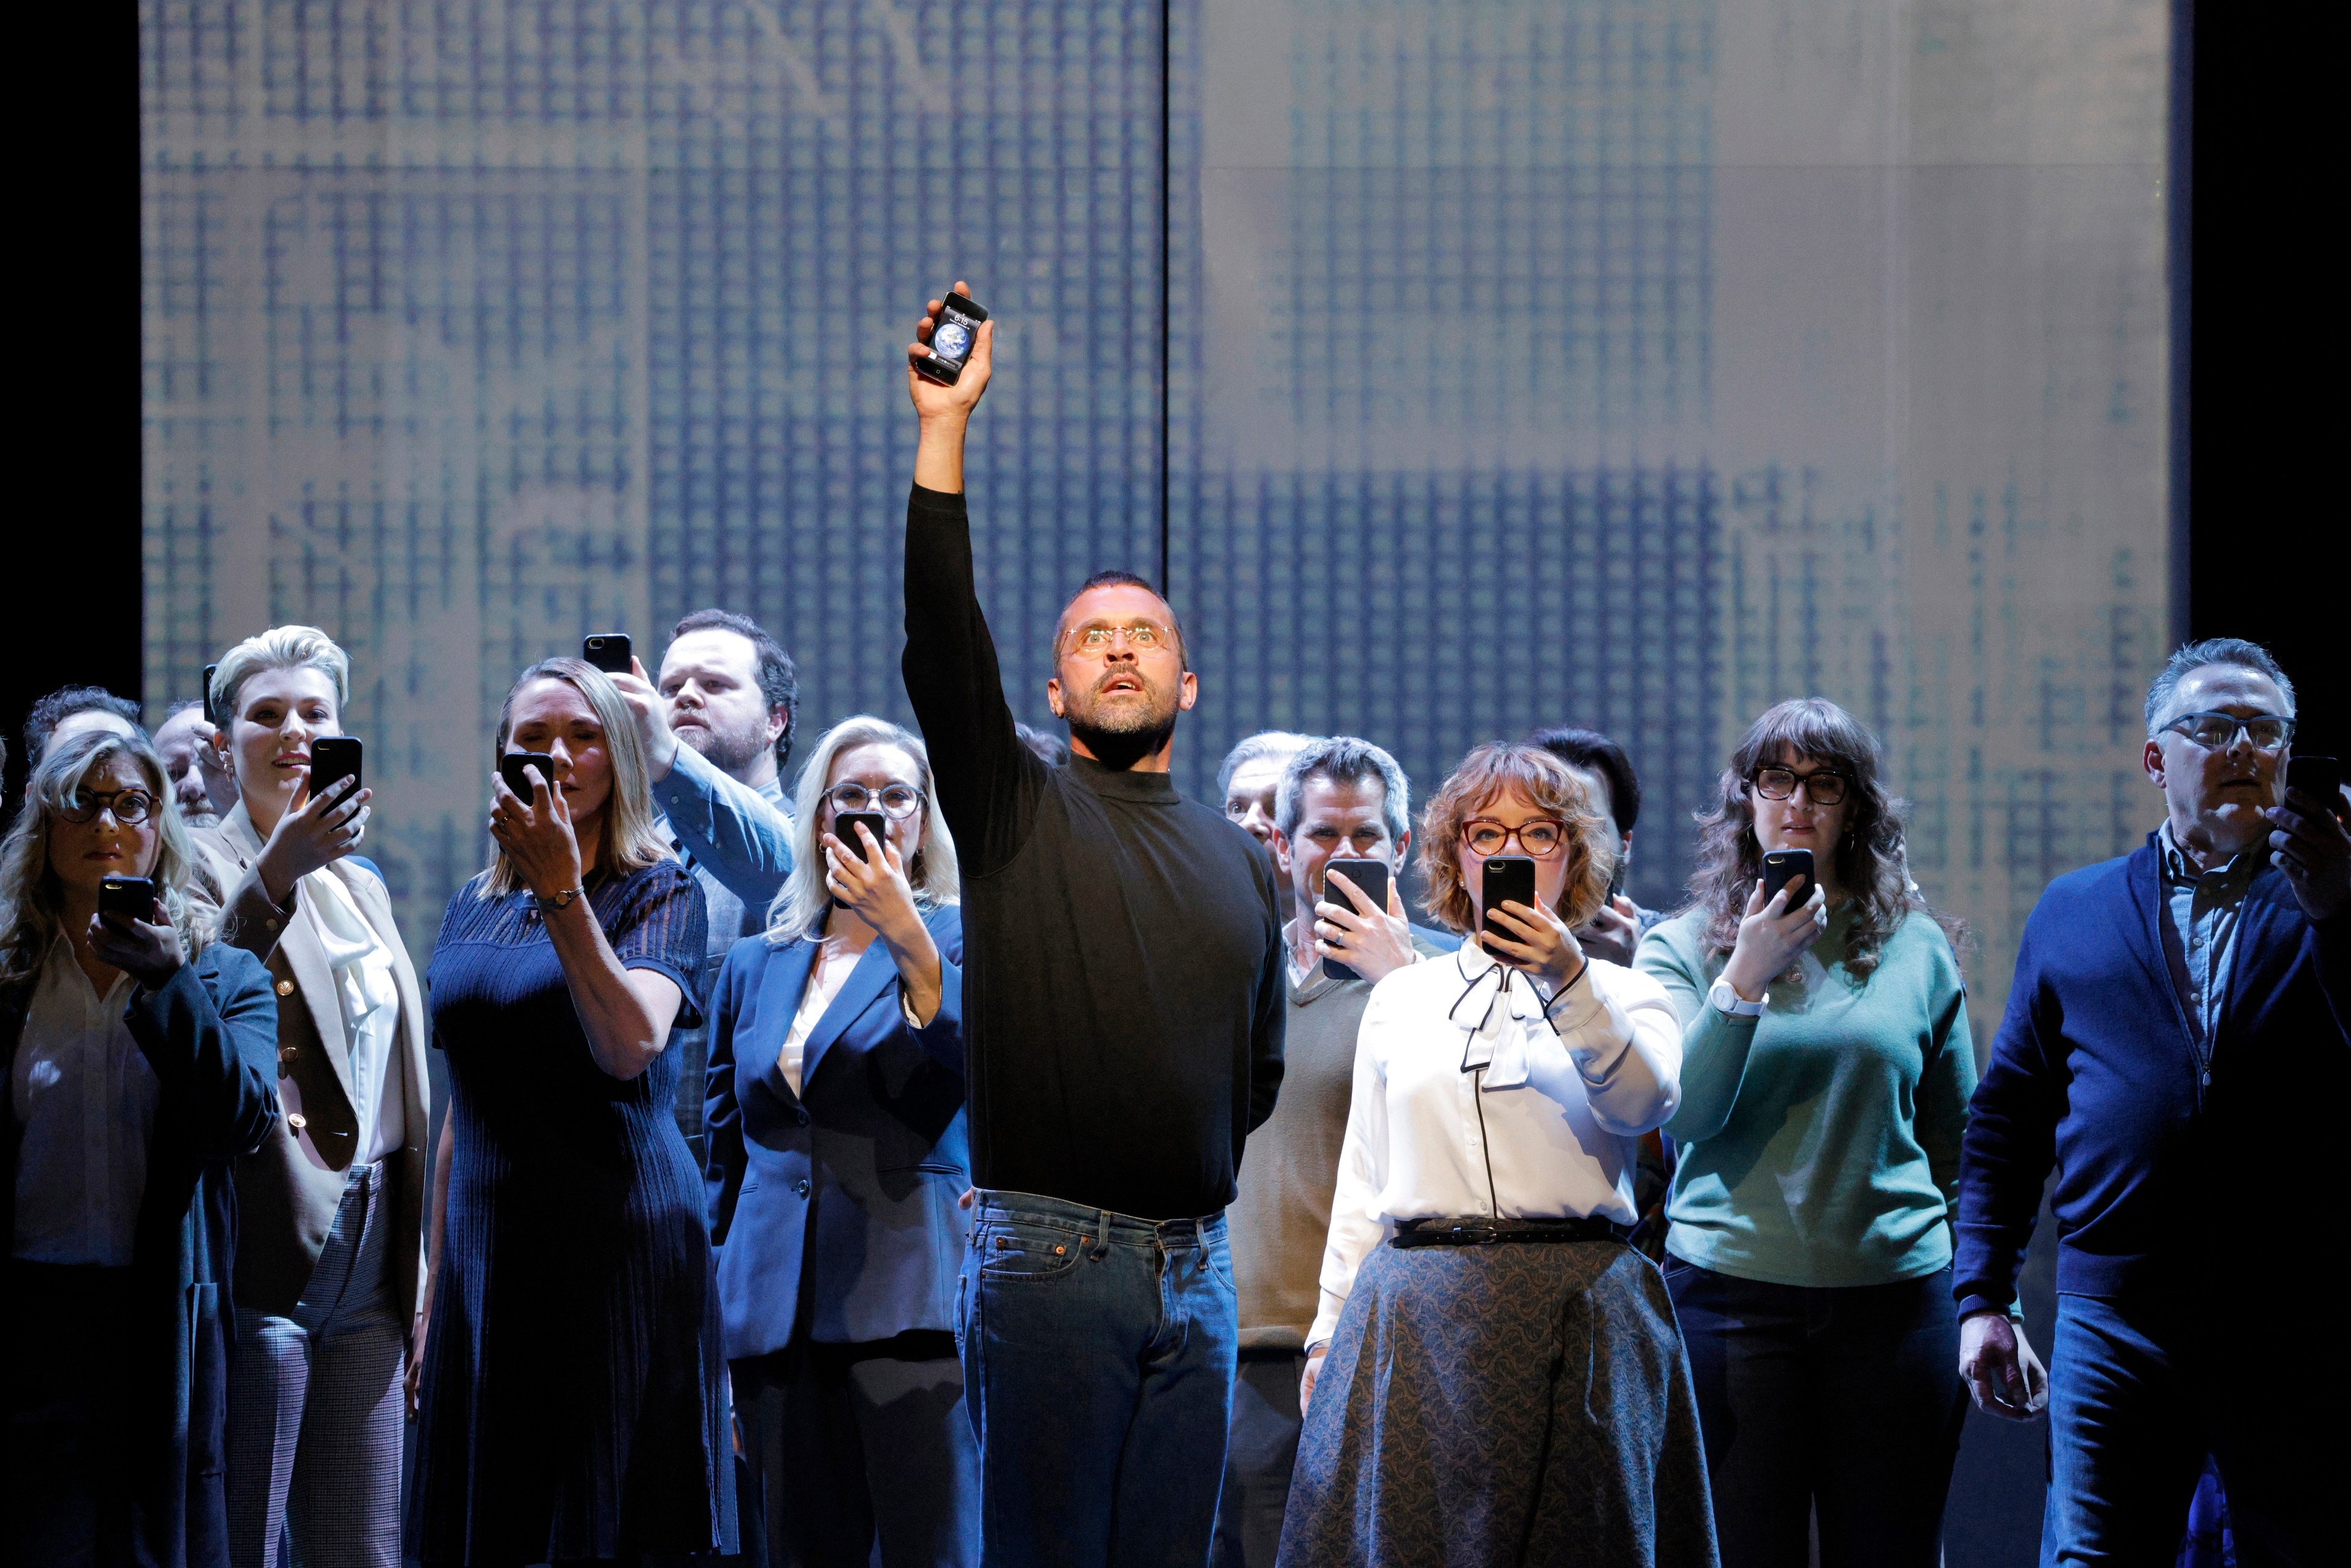 A Softer Steve Jobs? San Francisco Opera Aims To Untangle the Myths of the Iconic Apple Mogul